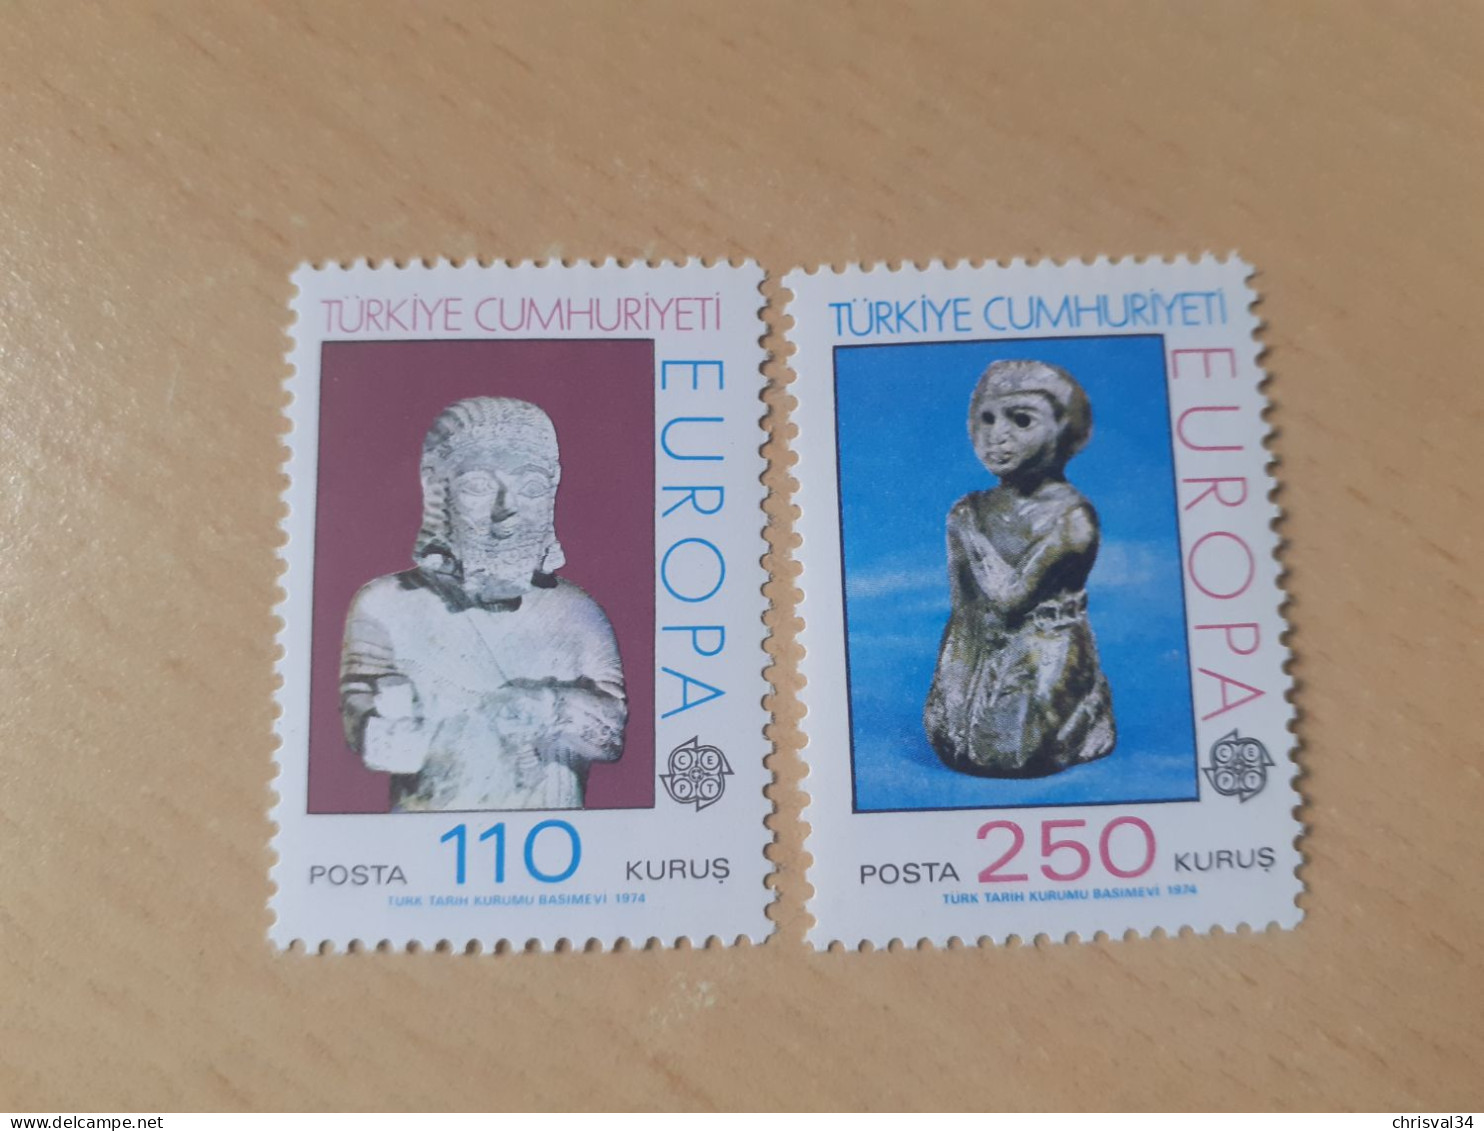 TIMBRES   TURQUIE   ANNEE   1974    N  2089 / 2090   COTE  7,50  EUROS   NEUFS   LUXE** - Nuevos